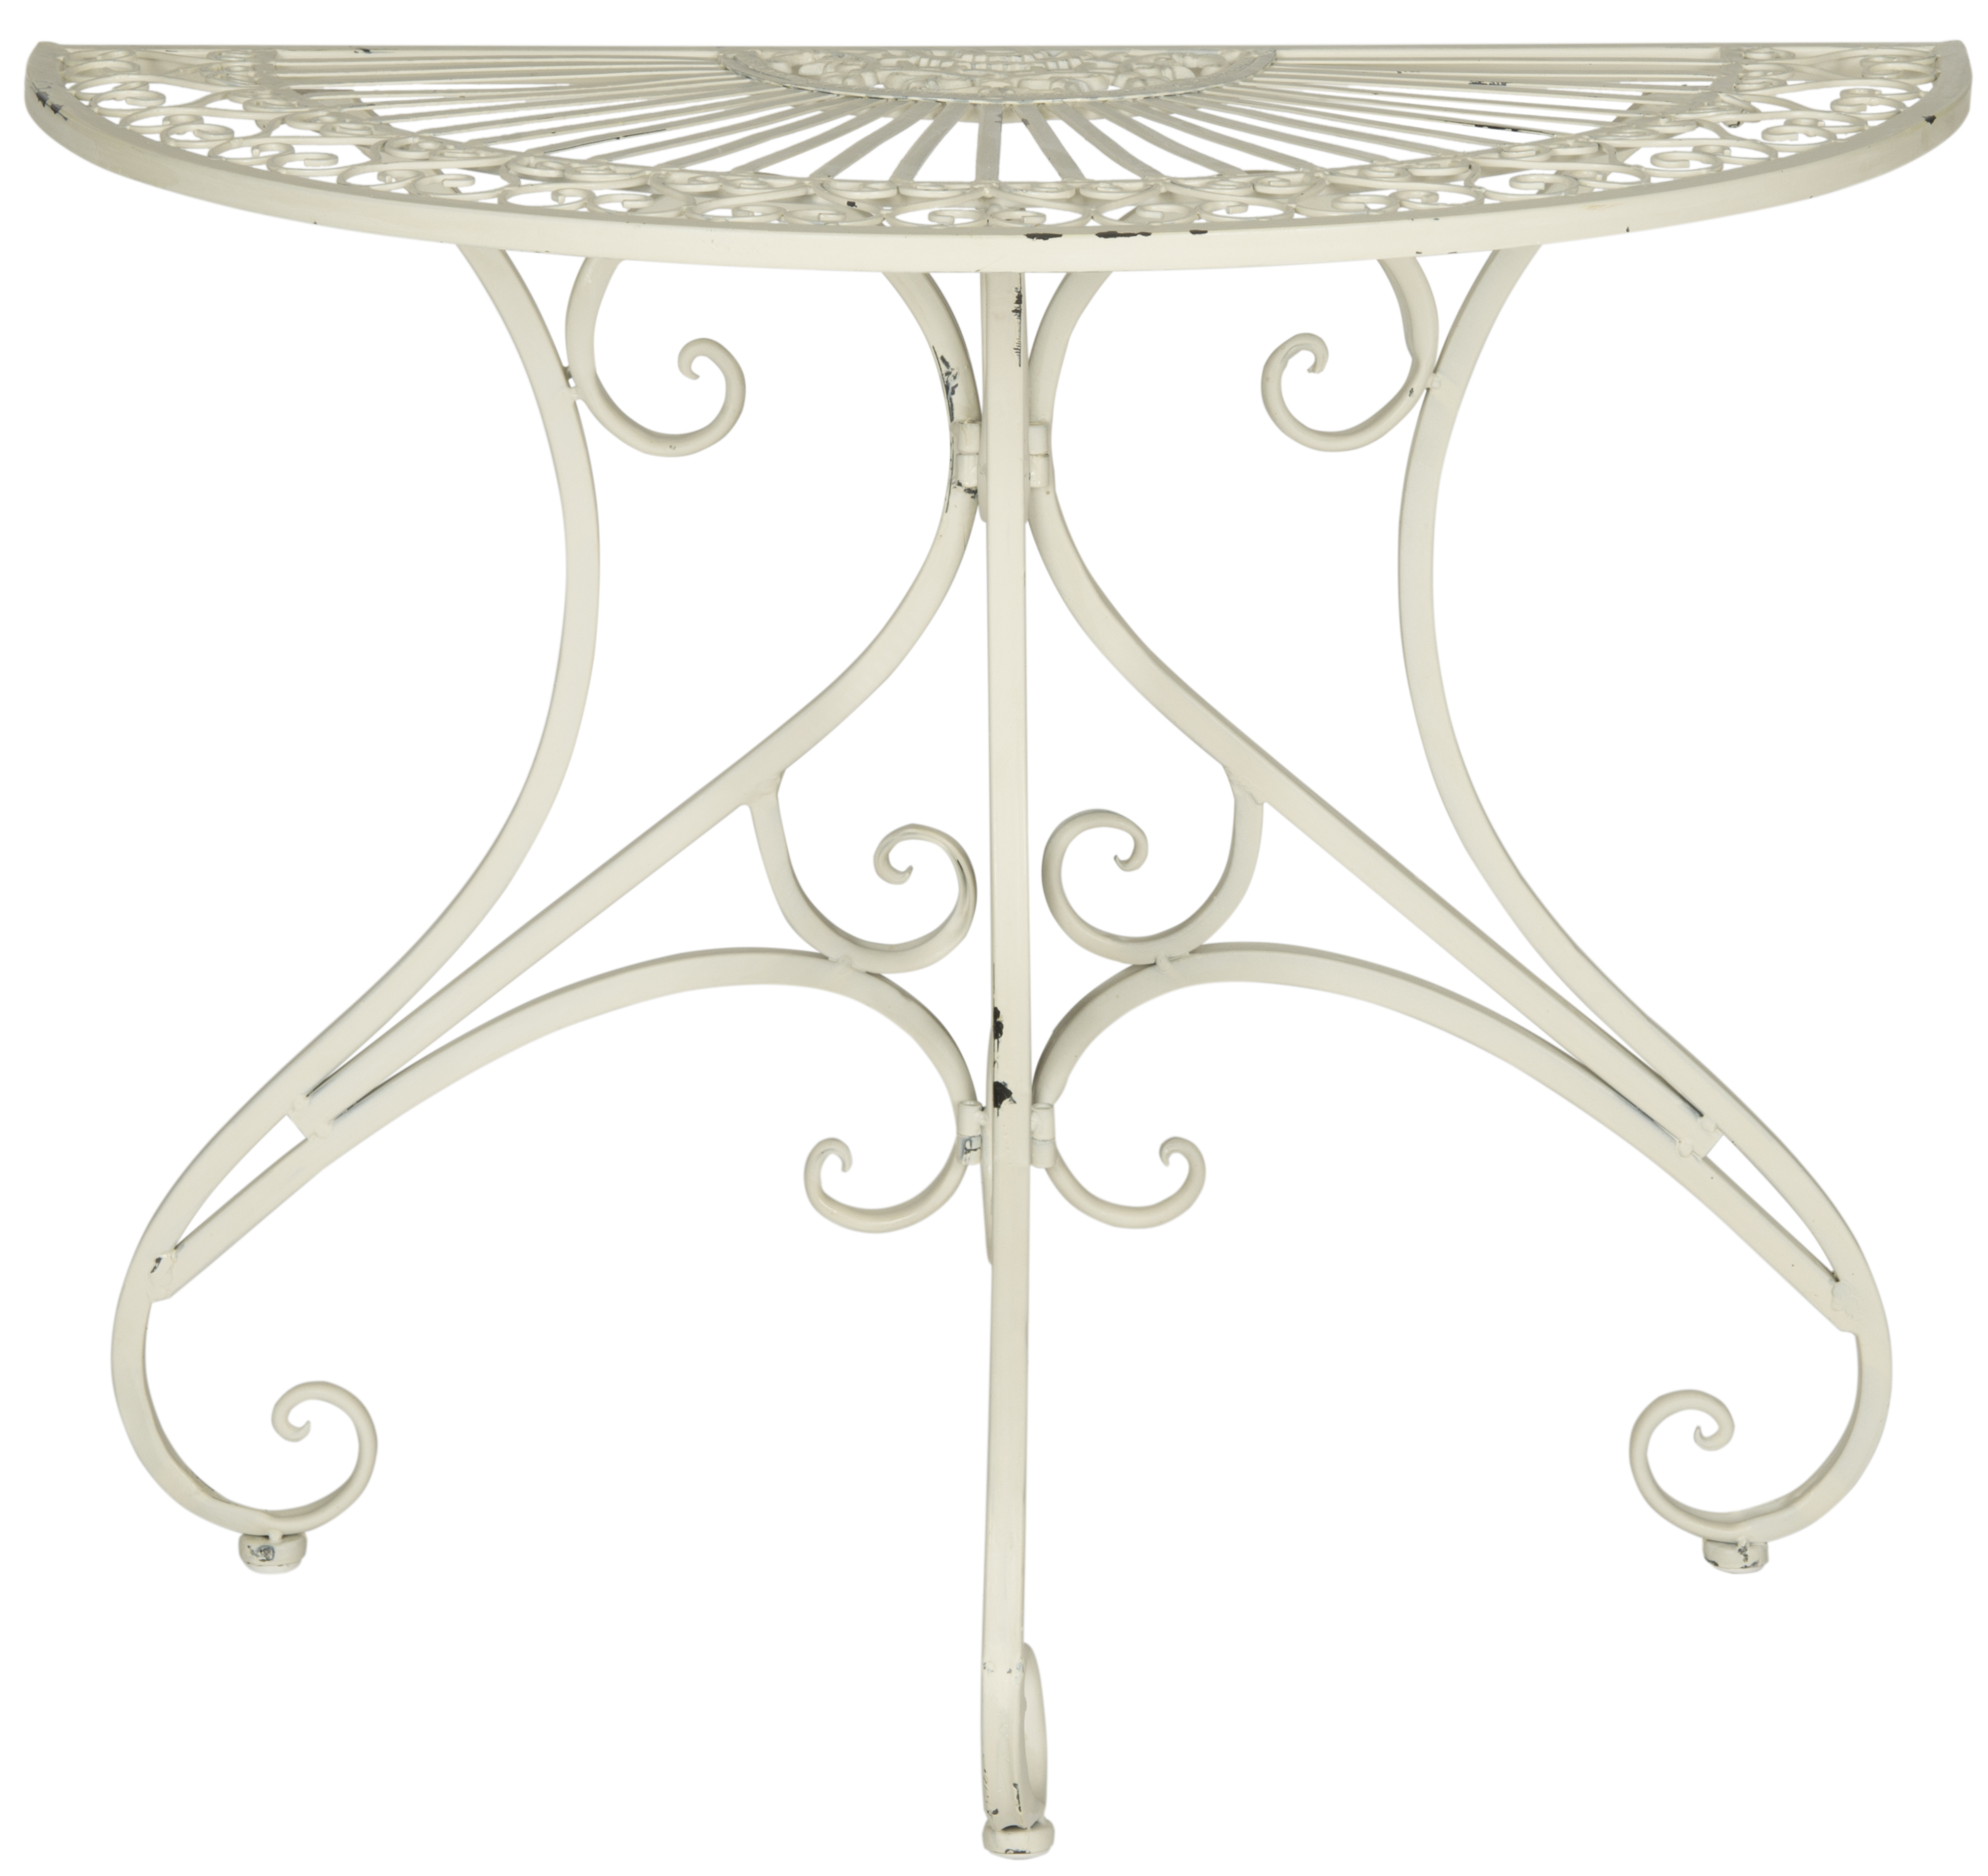 SAFAVIEH Annalise Outdoor Patio Semi-Circle Accent Table, Antique White - image 3 of 5